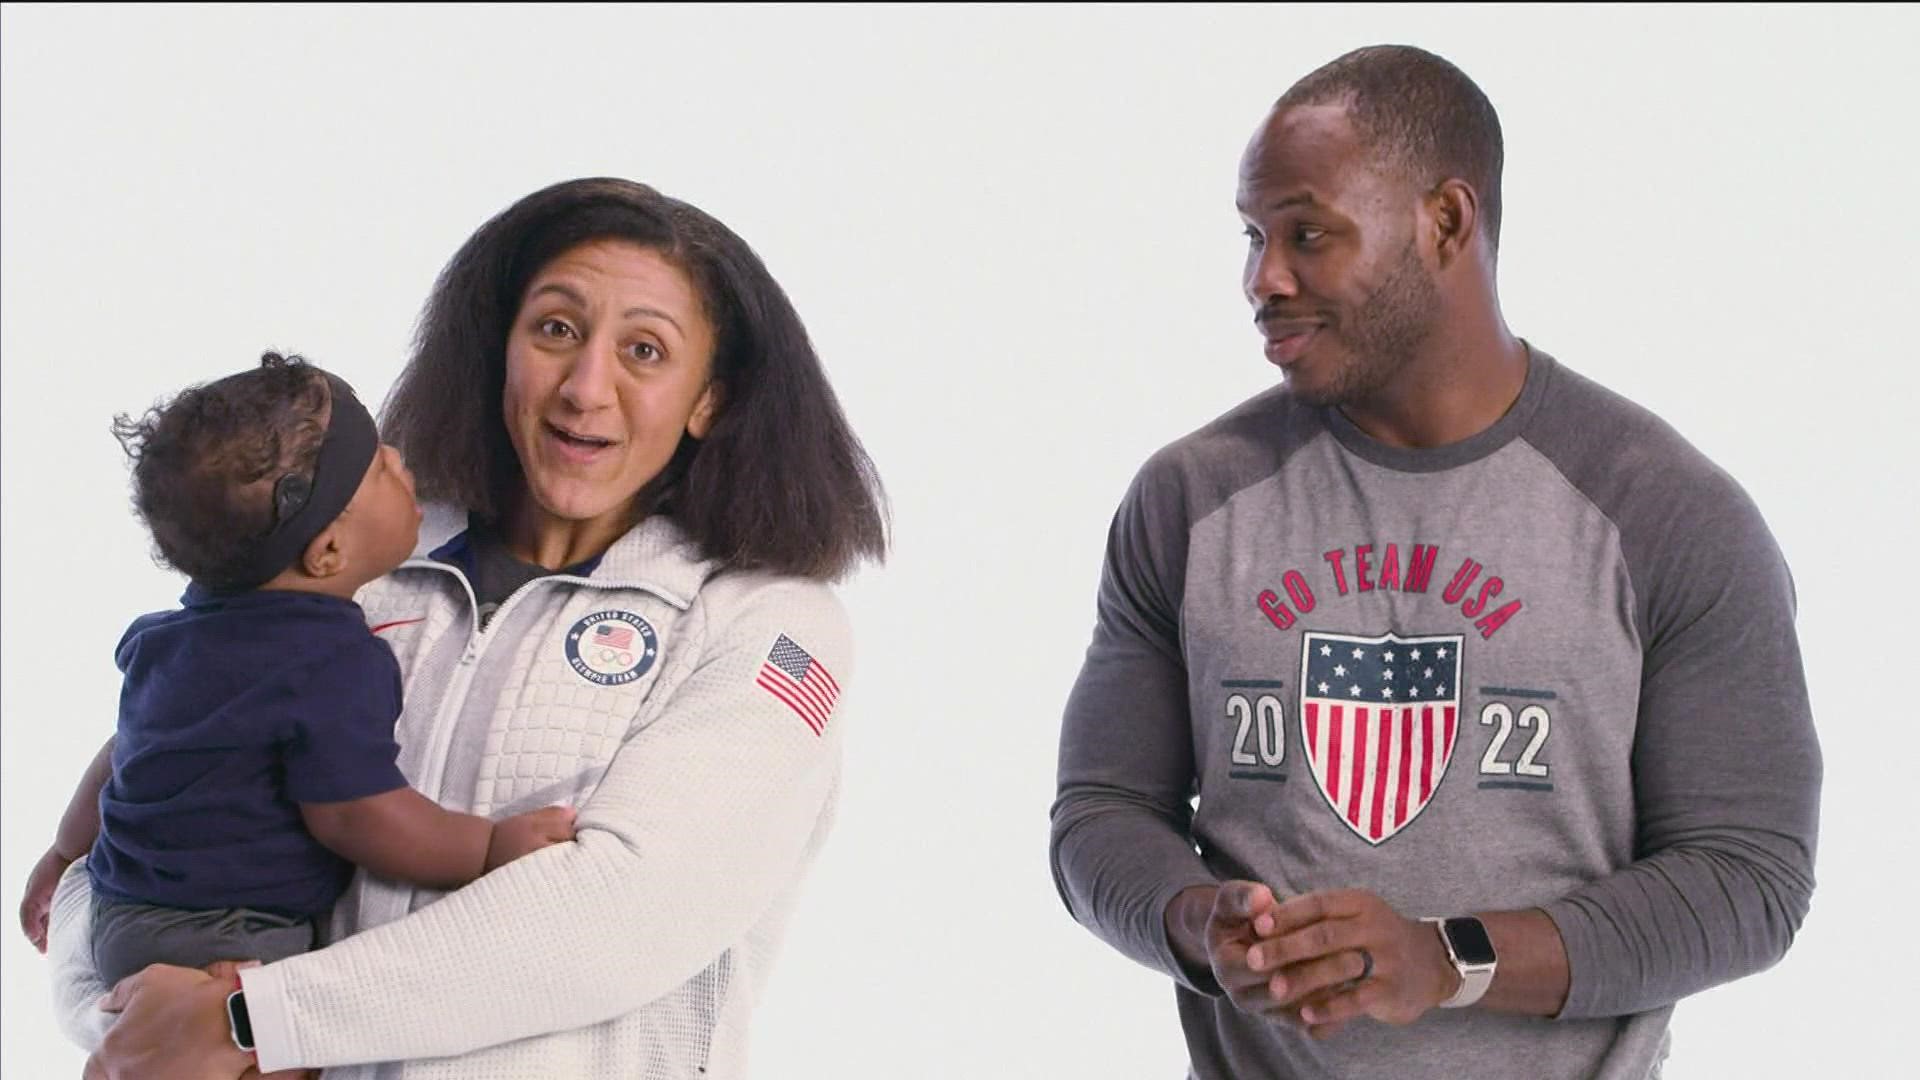 Elana Meyers Taylor is a three-time Olympic bobsled medalist.